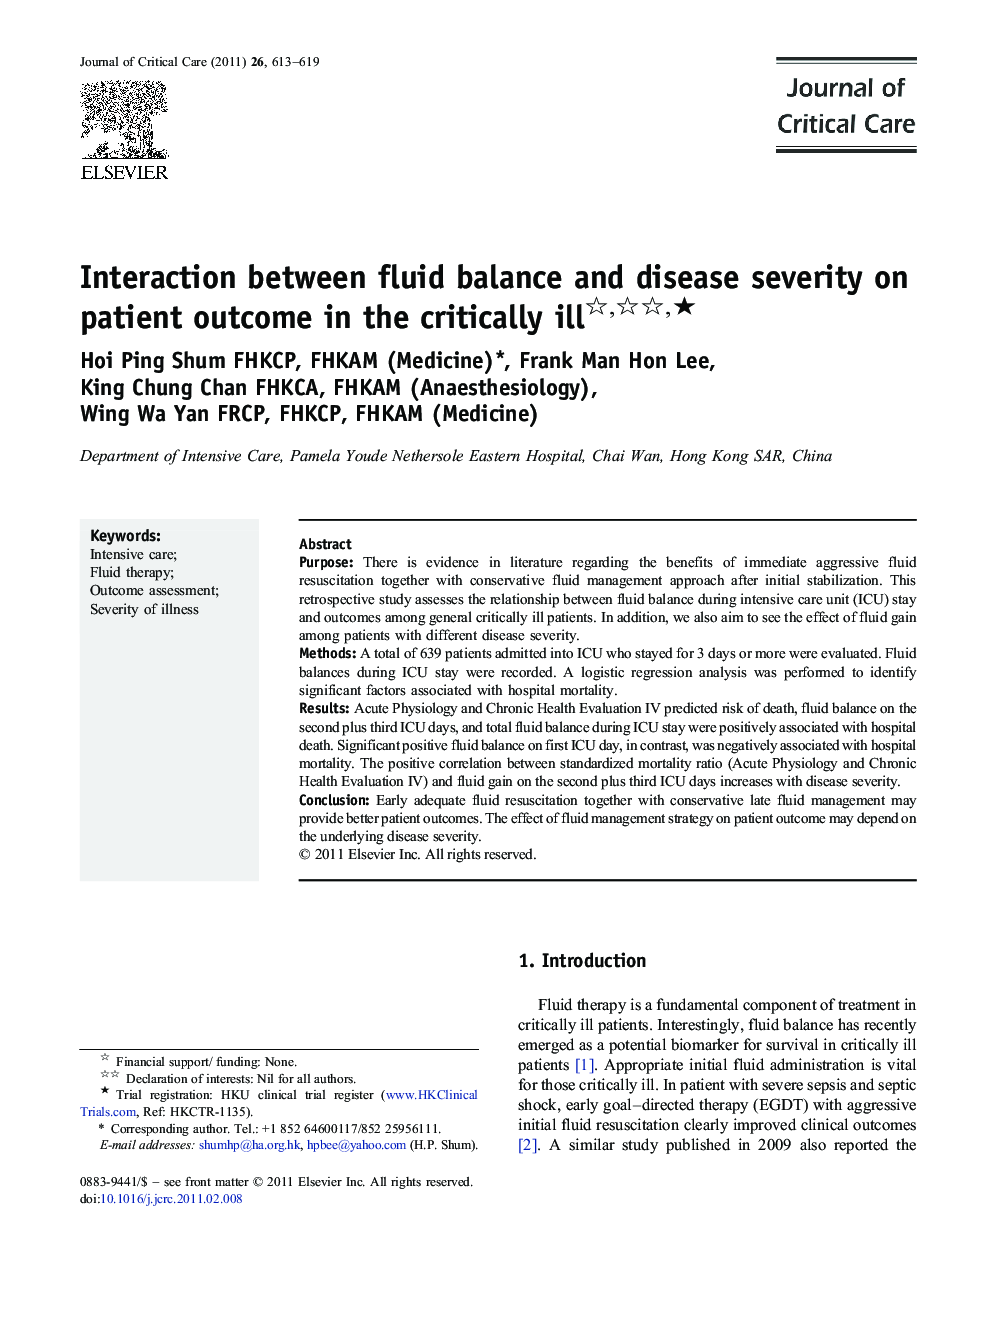 Interaction between fluid balance and disease severity on patient outcome in the critically ill ★